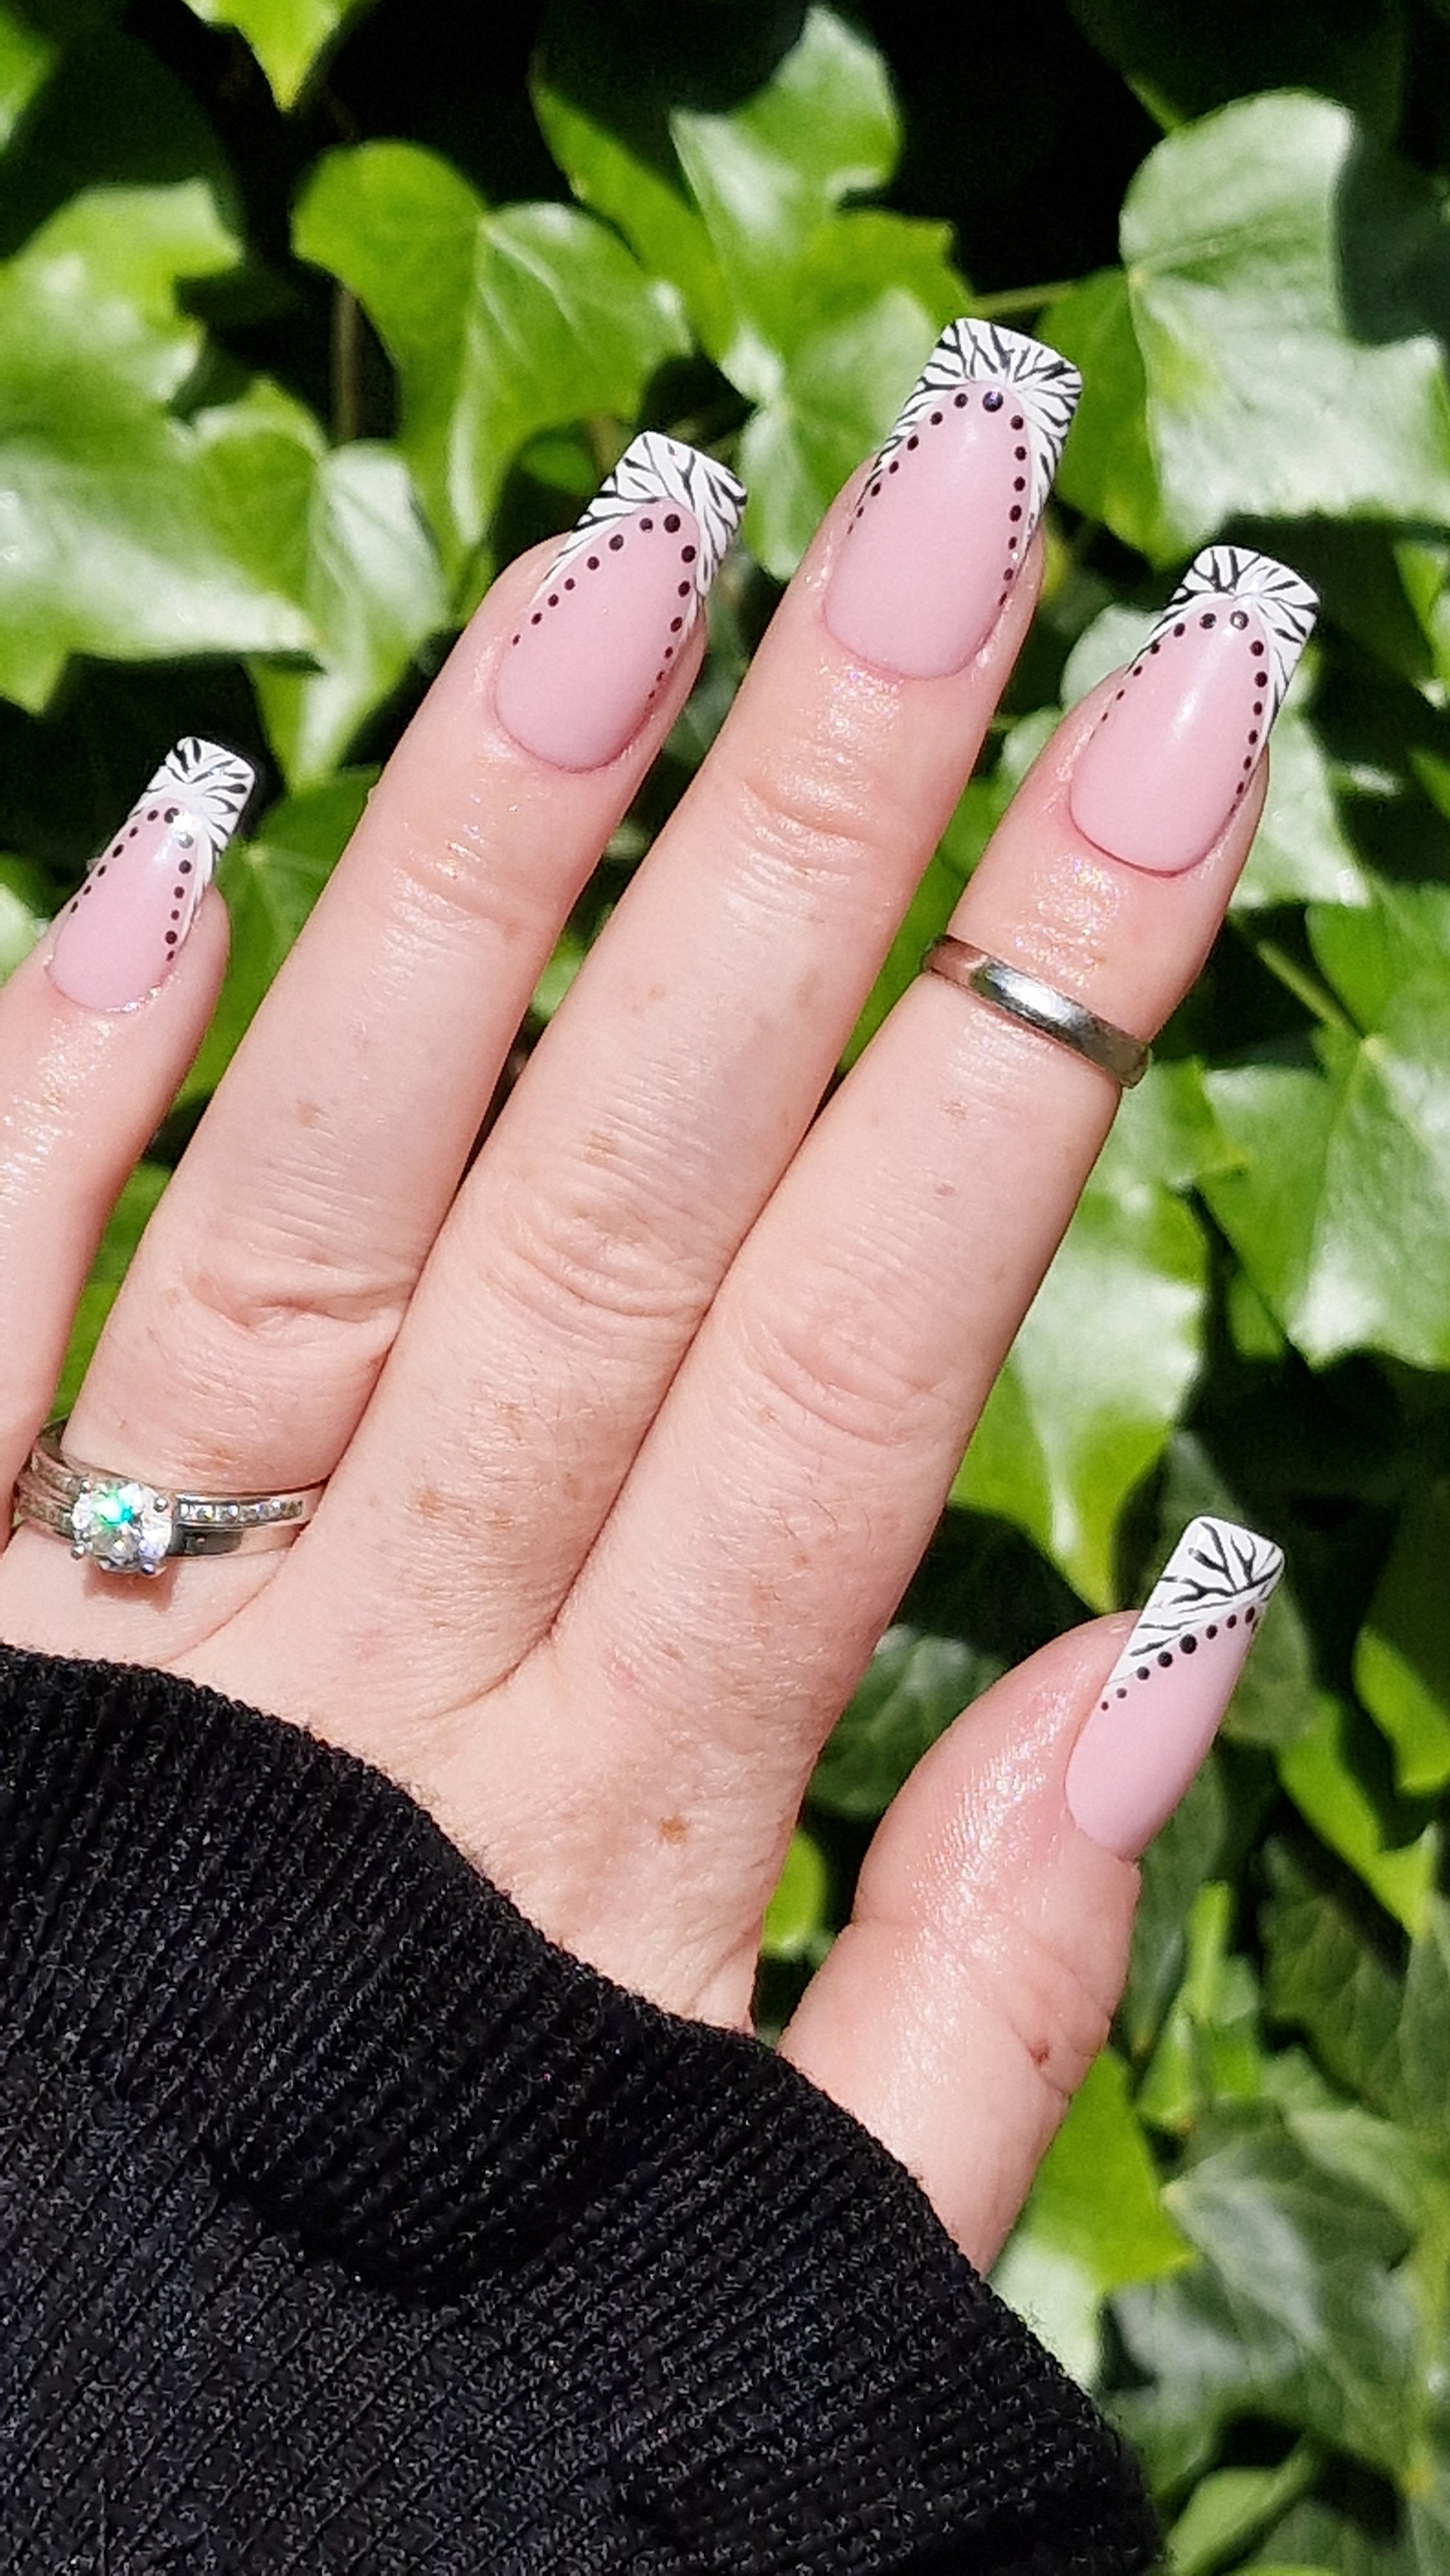 How to Infill Gel Nails at Home the Right Way – Mylee